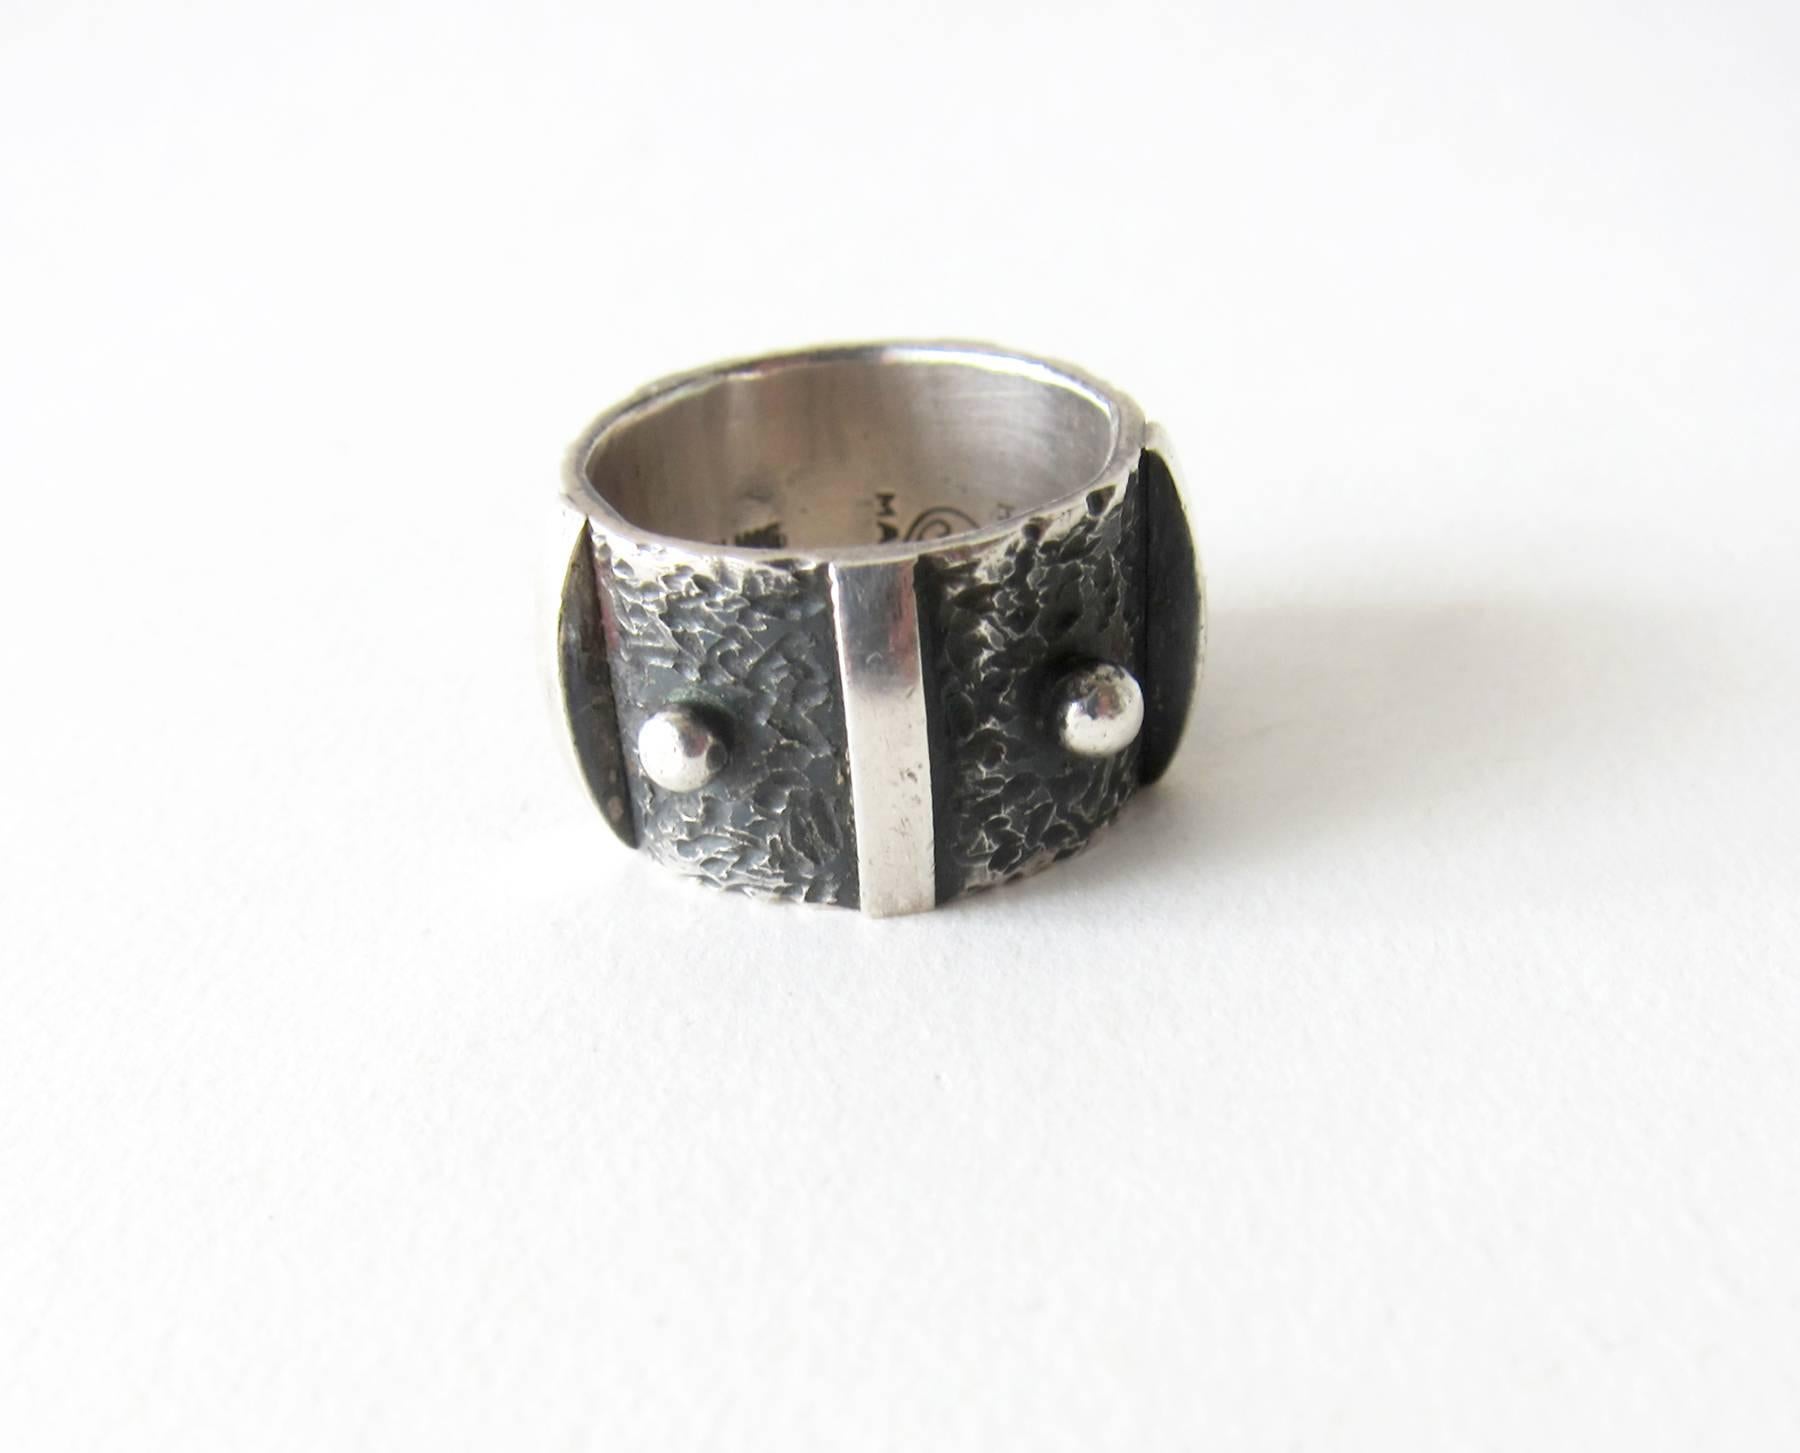 Sterling silver wide band ring featuring a studded design created by James Parker of San Diego.  Parker was an early member of the San Diego Allied Craftsmen Association which started in the 1940's.  His jewelry was featured in the show 